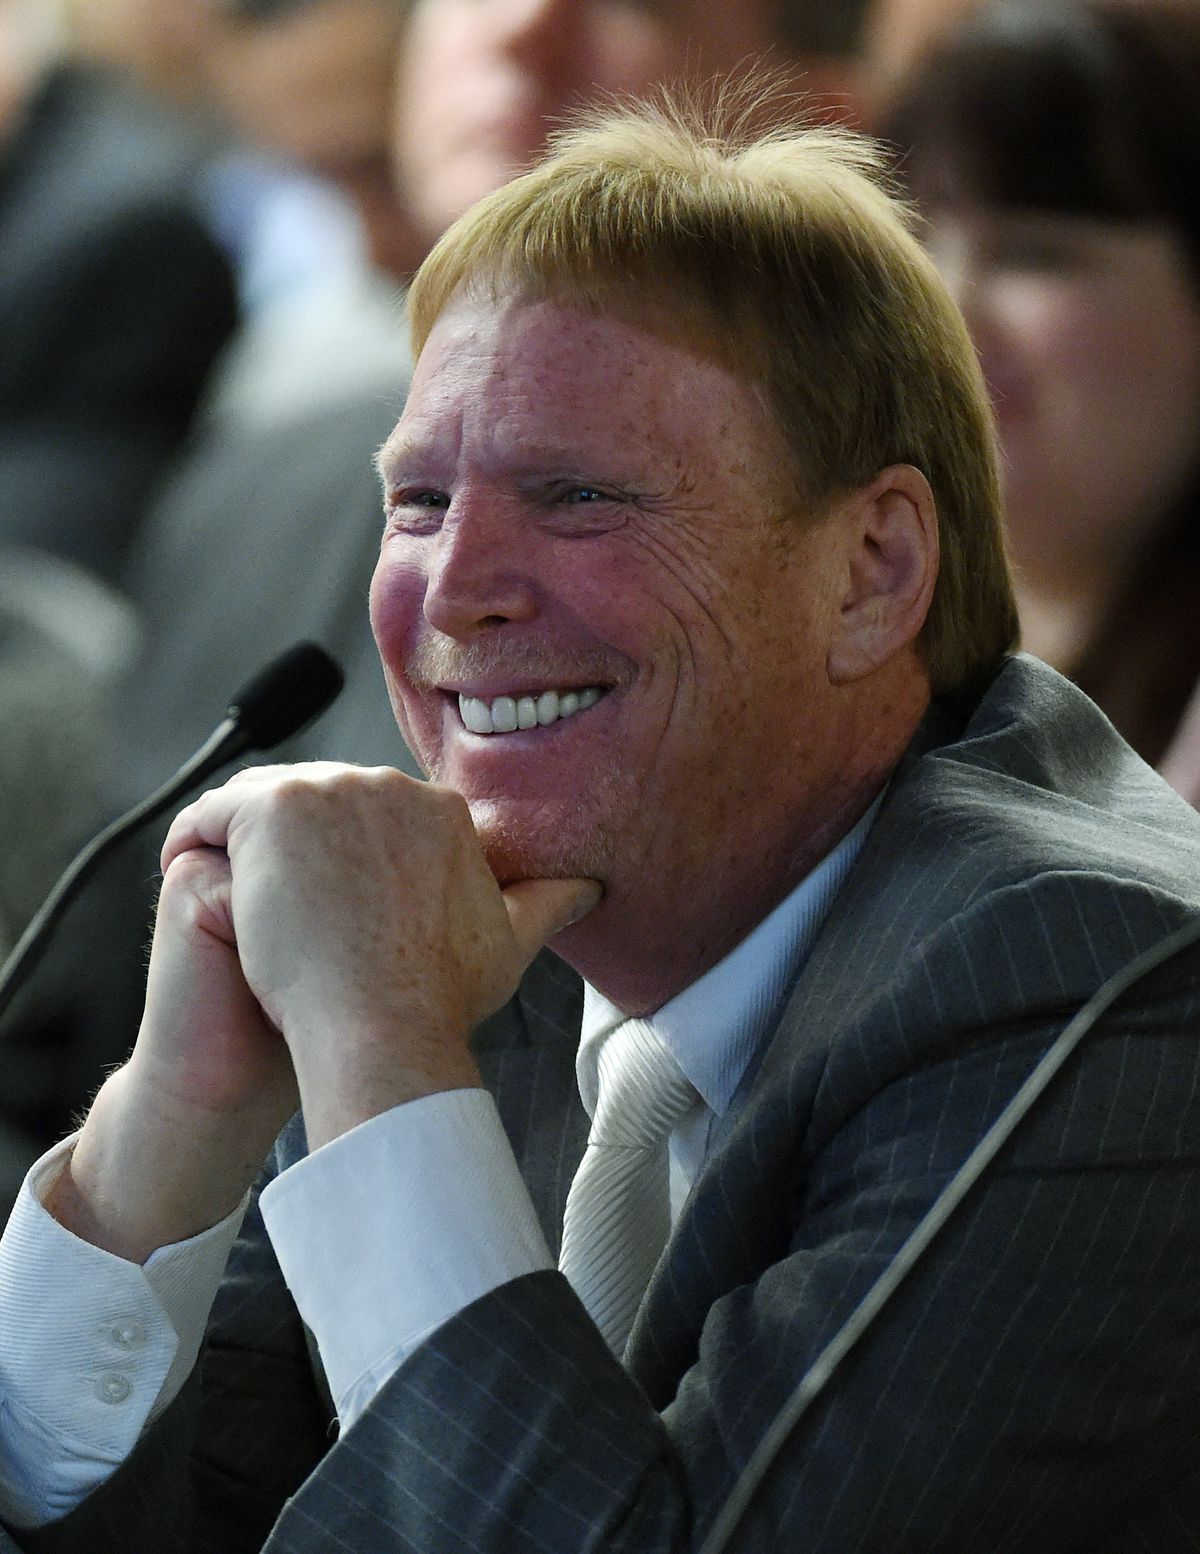 Mark Davis Meets With Nevada Tourism Officials About Moving Raiders To Las Vegas